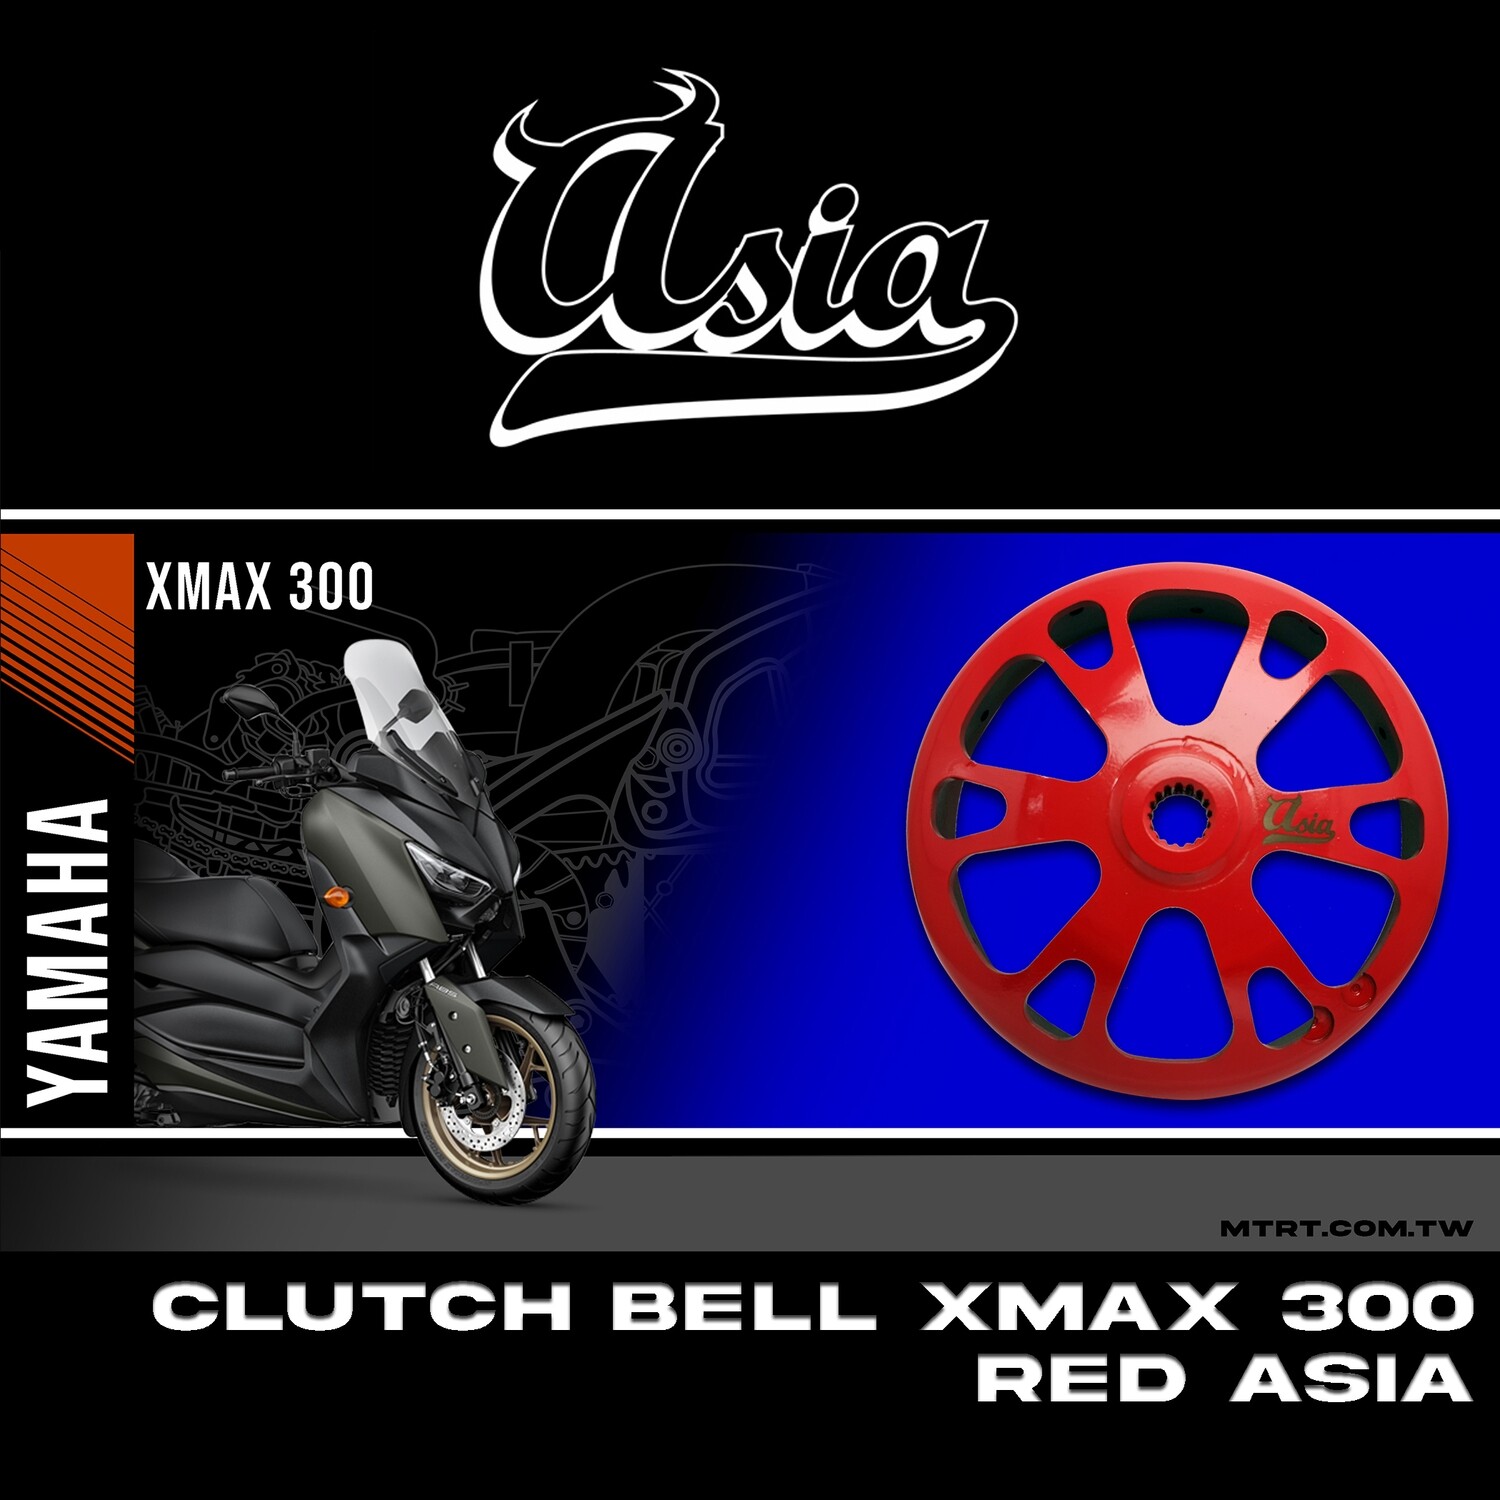 CLUTCH BELL XMAX300 RED ASIA